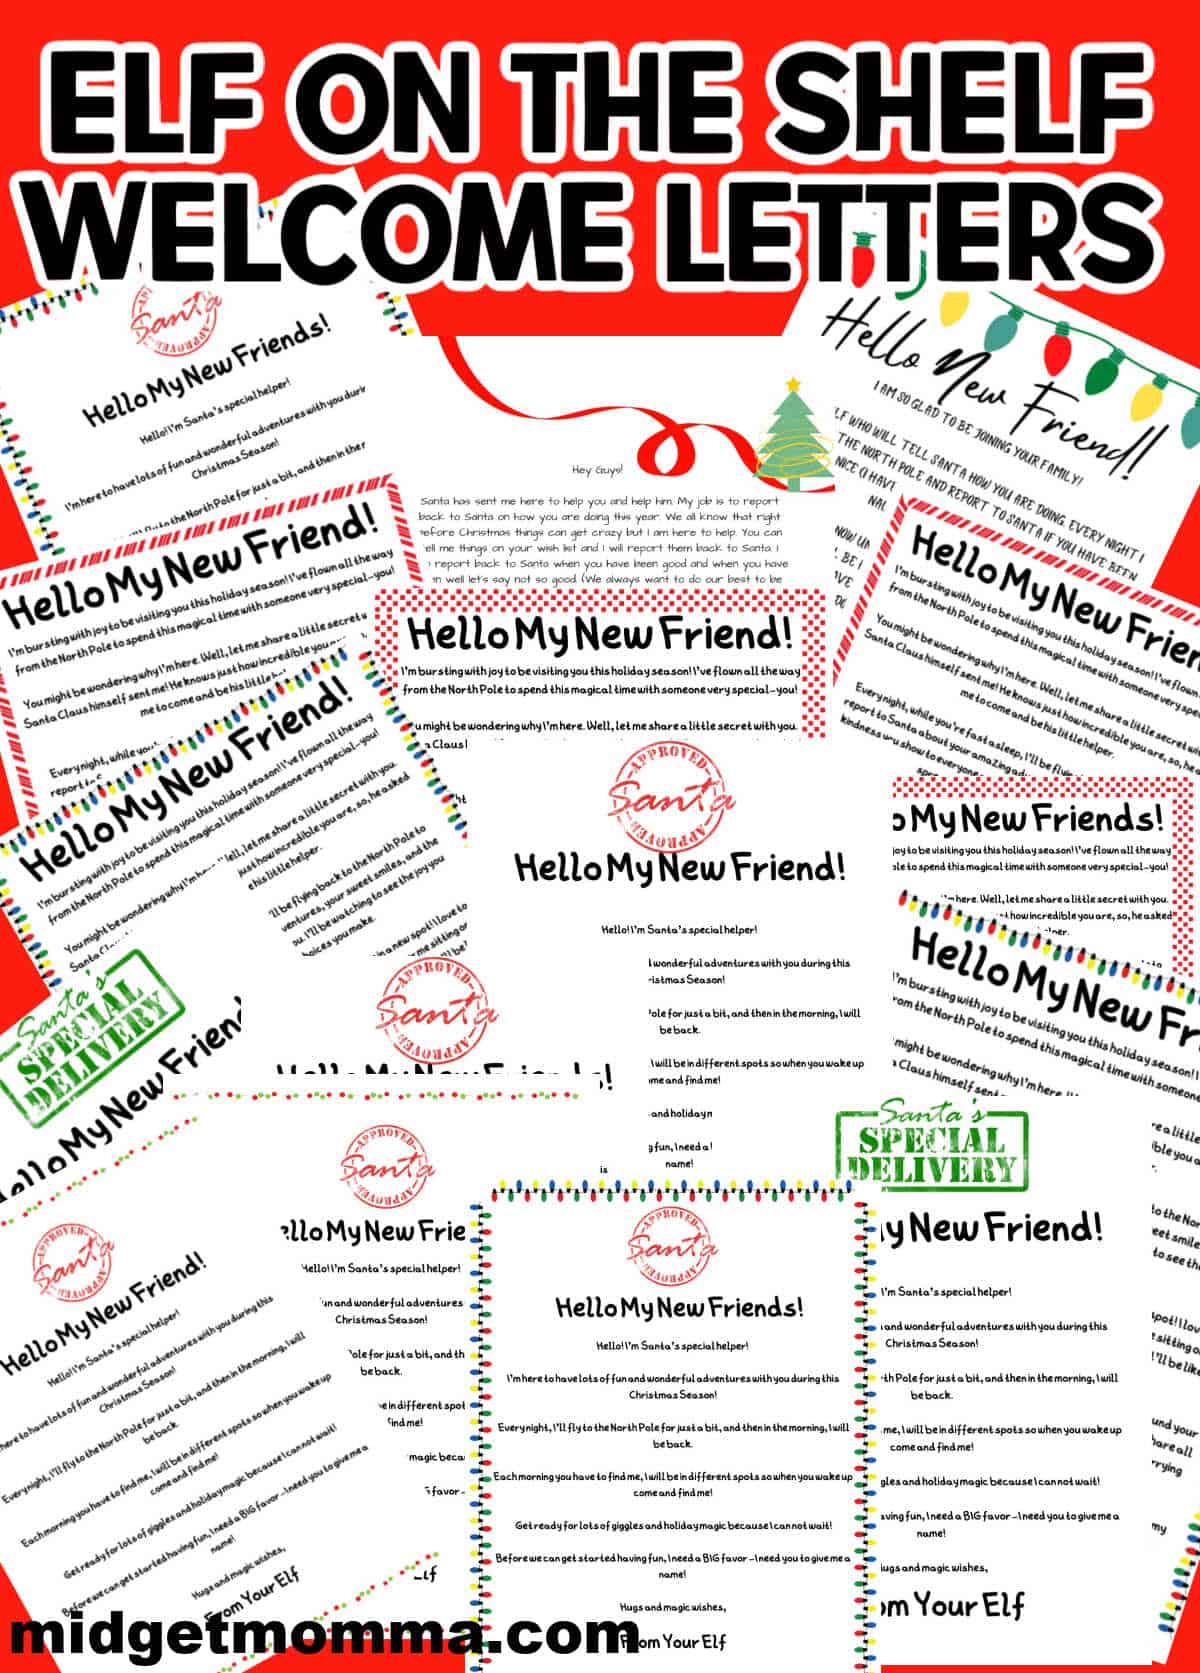 Vacation Home Welcome Book with Free Downloads + Welcome Letter